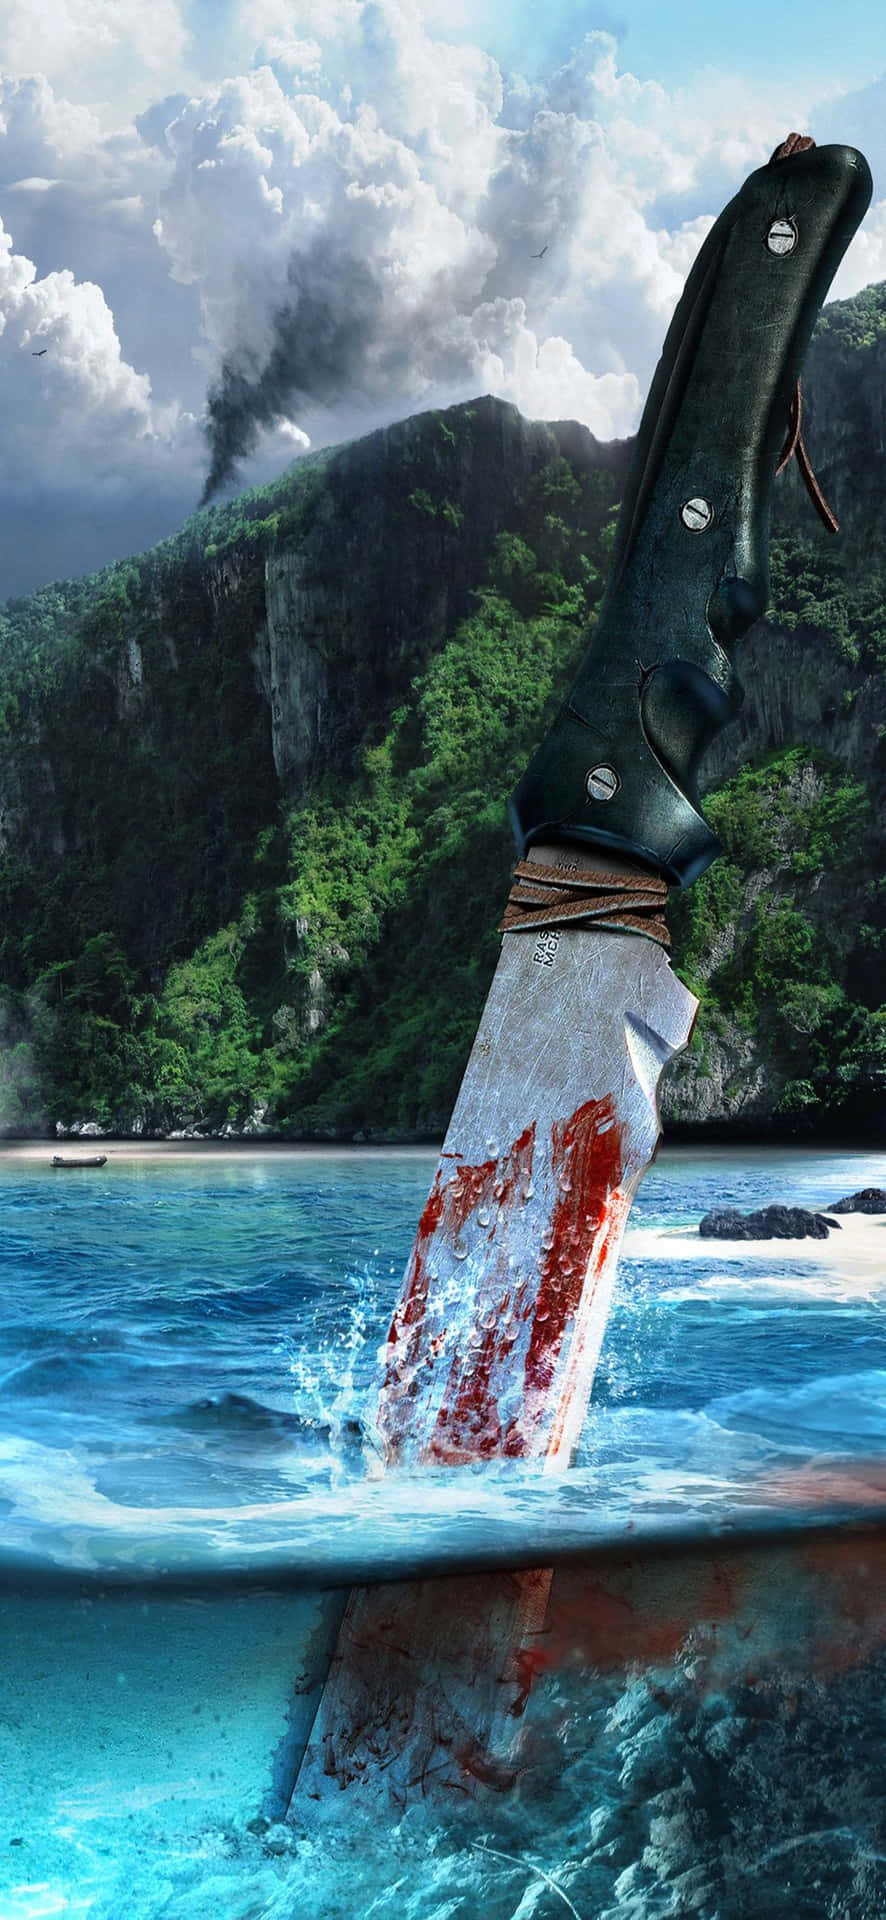 iPhone X Far Cry 3 Bloody Knife Background